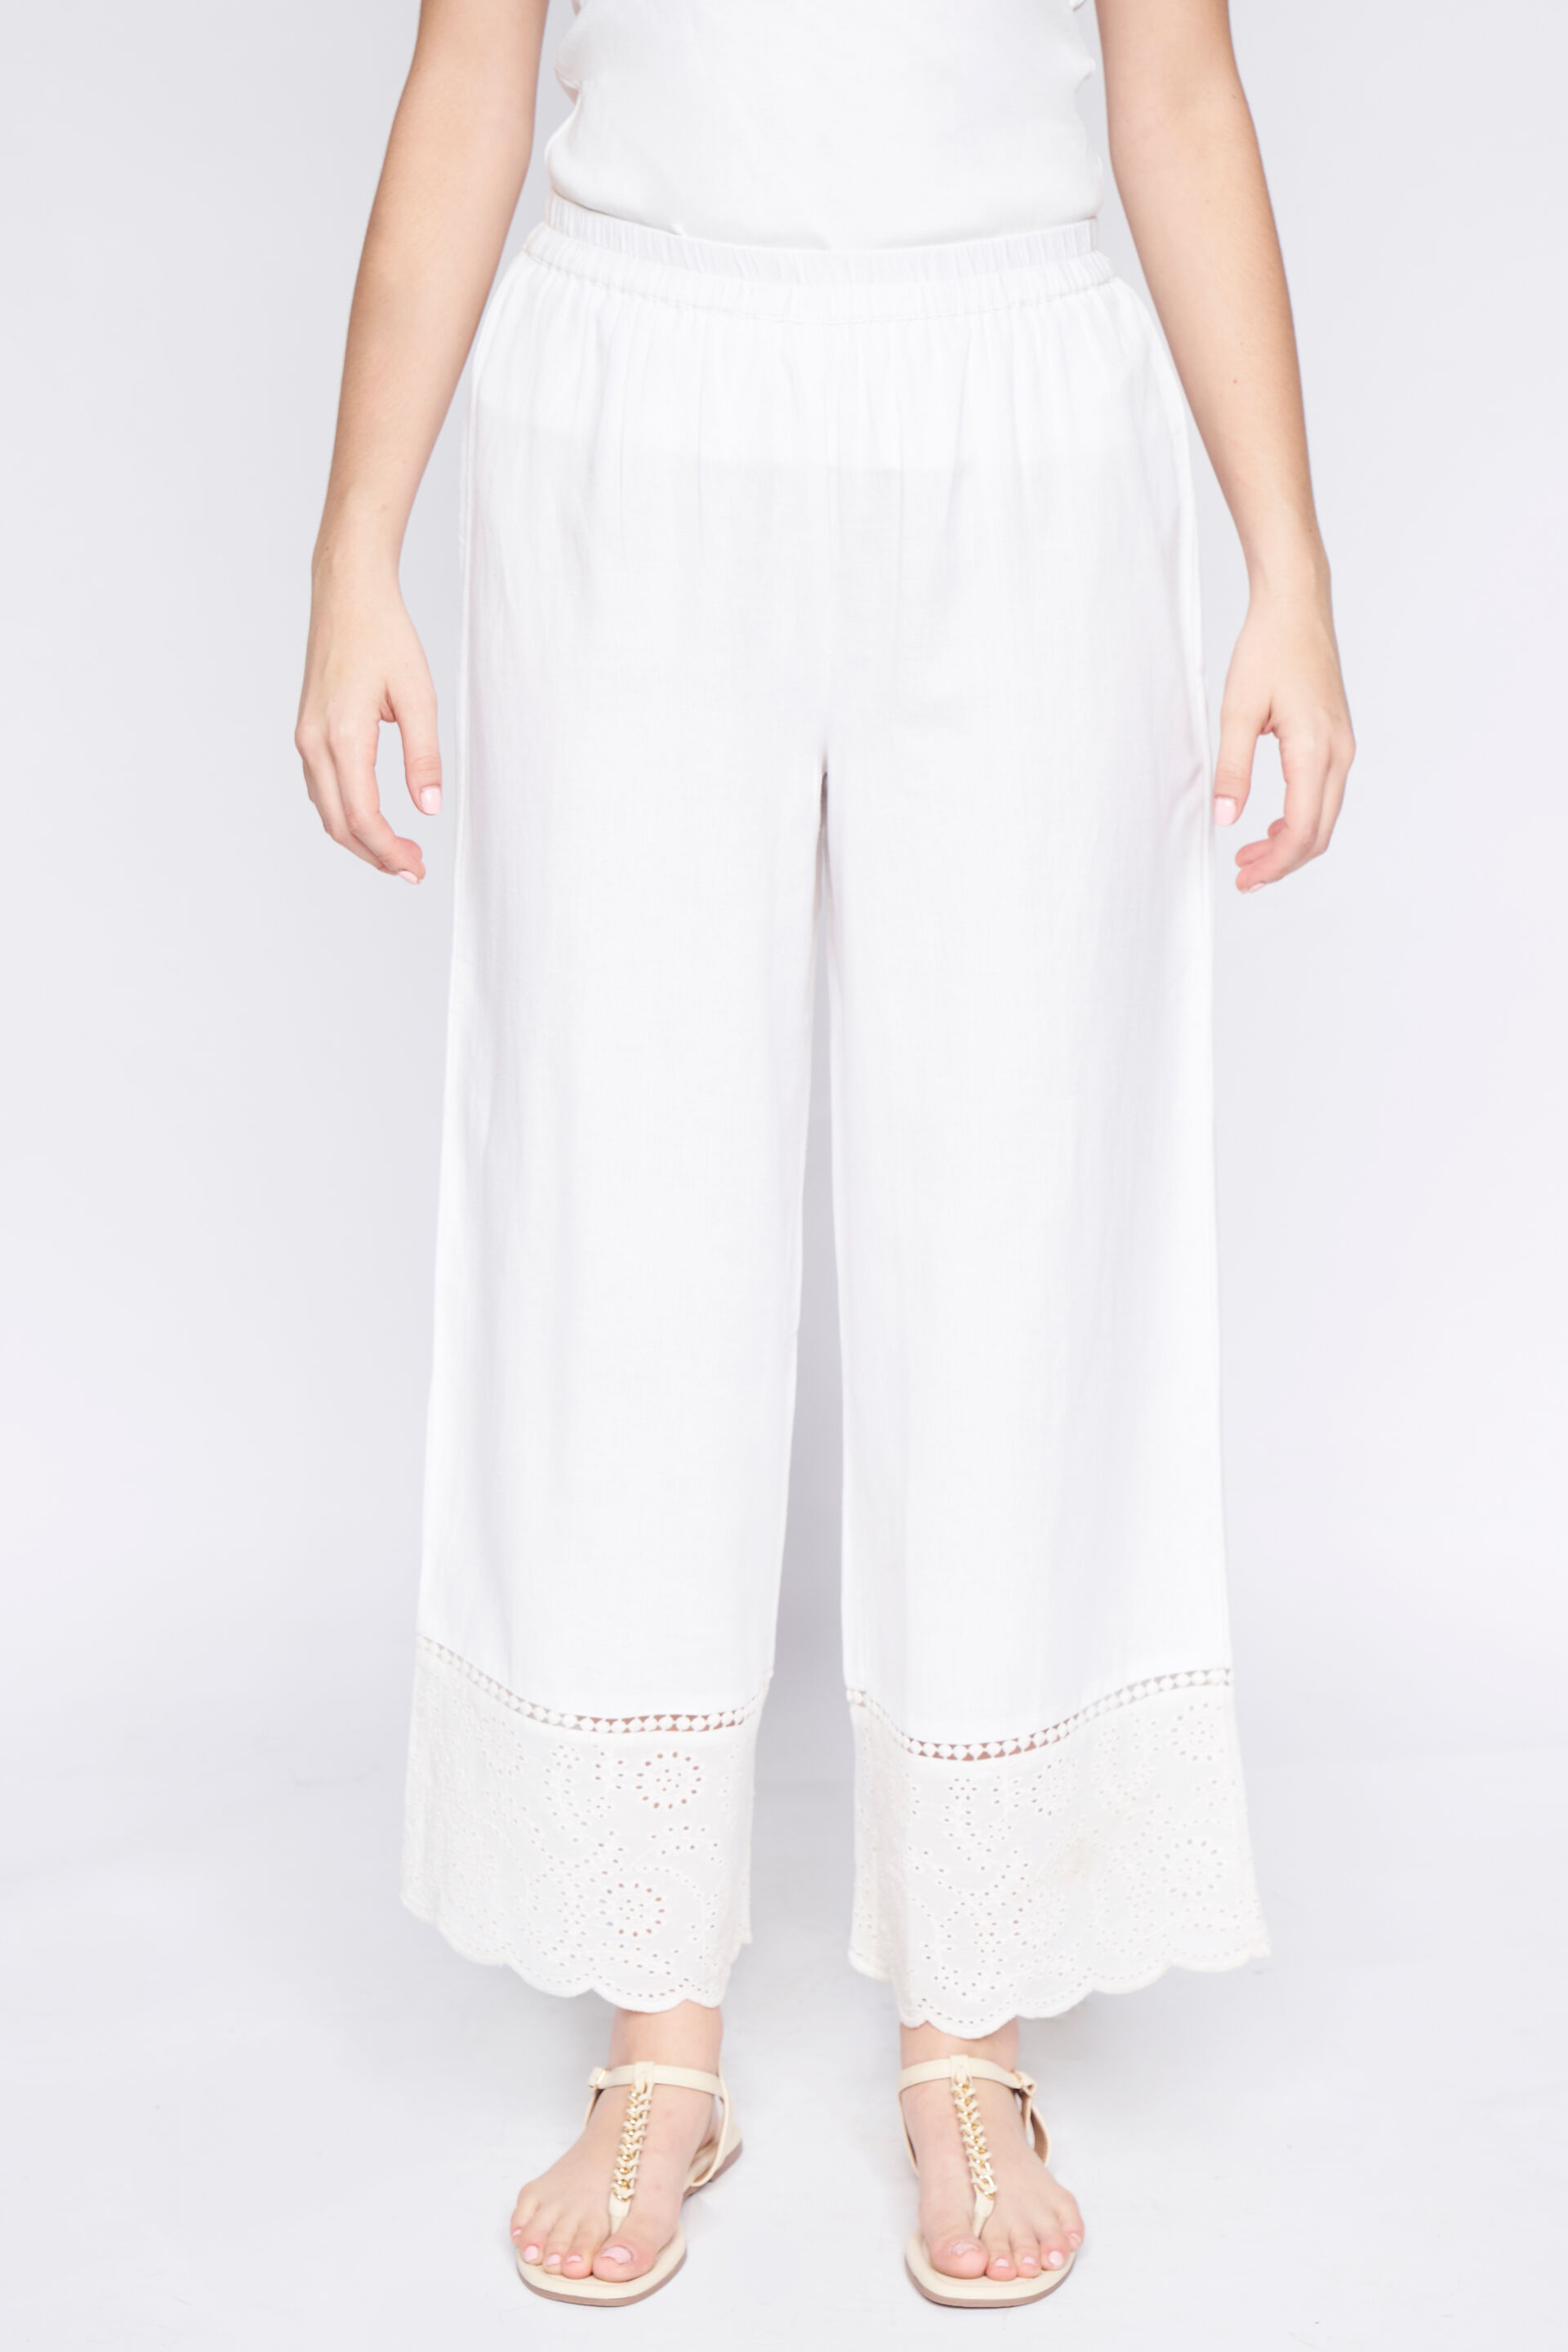 Off white straight pants detailed with lace and embroidery at bottom   Kora India